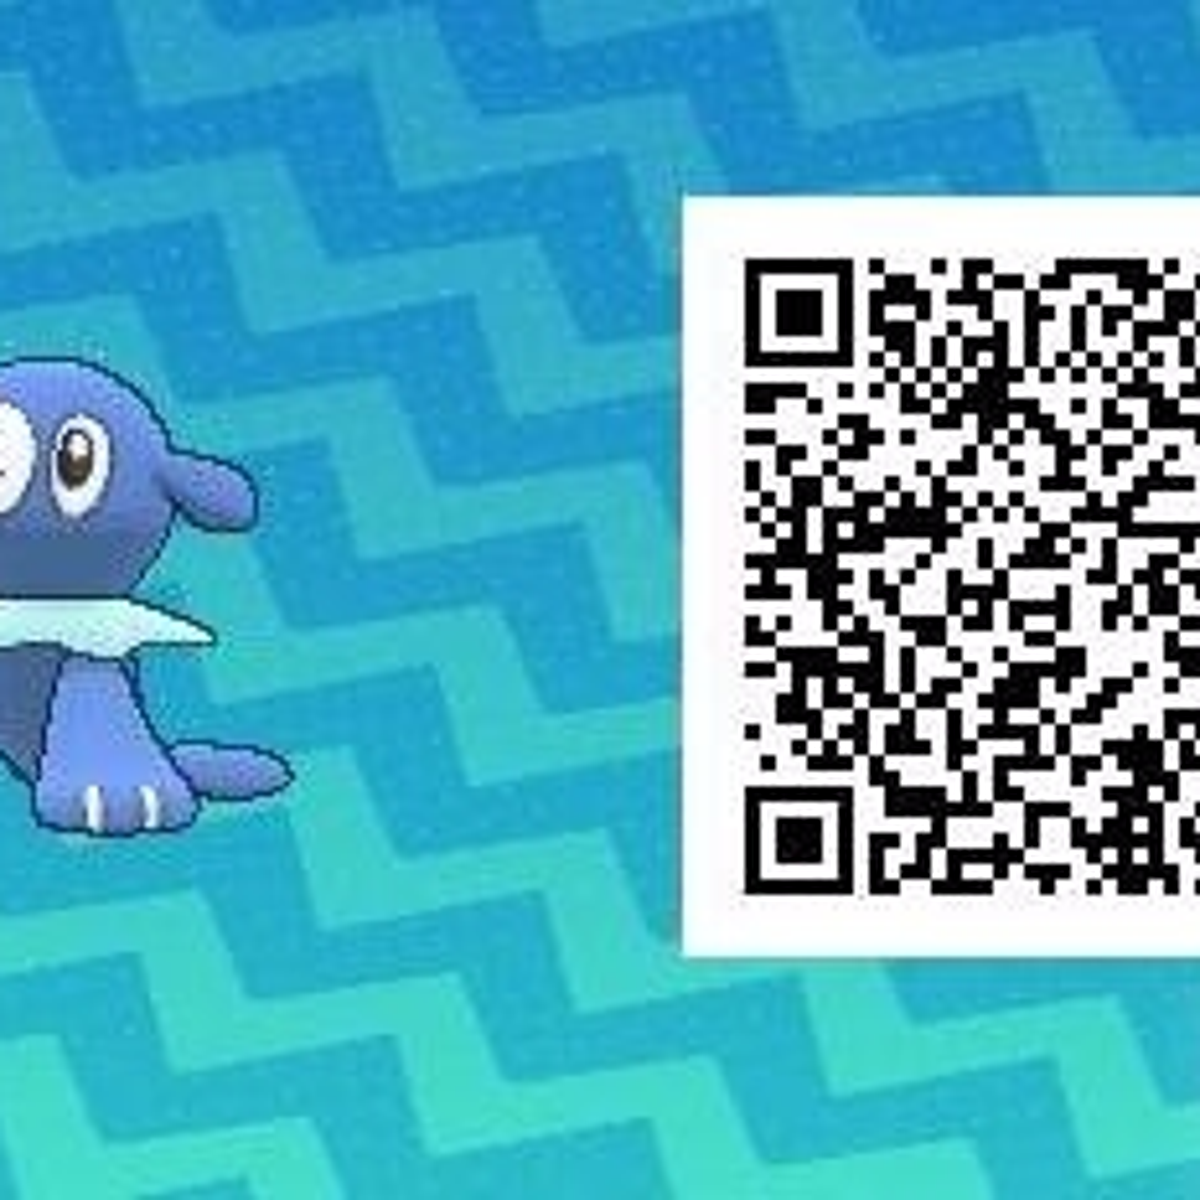 Pokemon Ultra Sun & Moon guide: how to get Magearna with a QR code